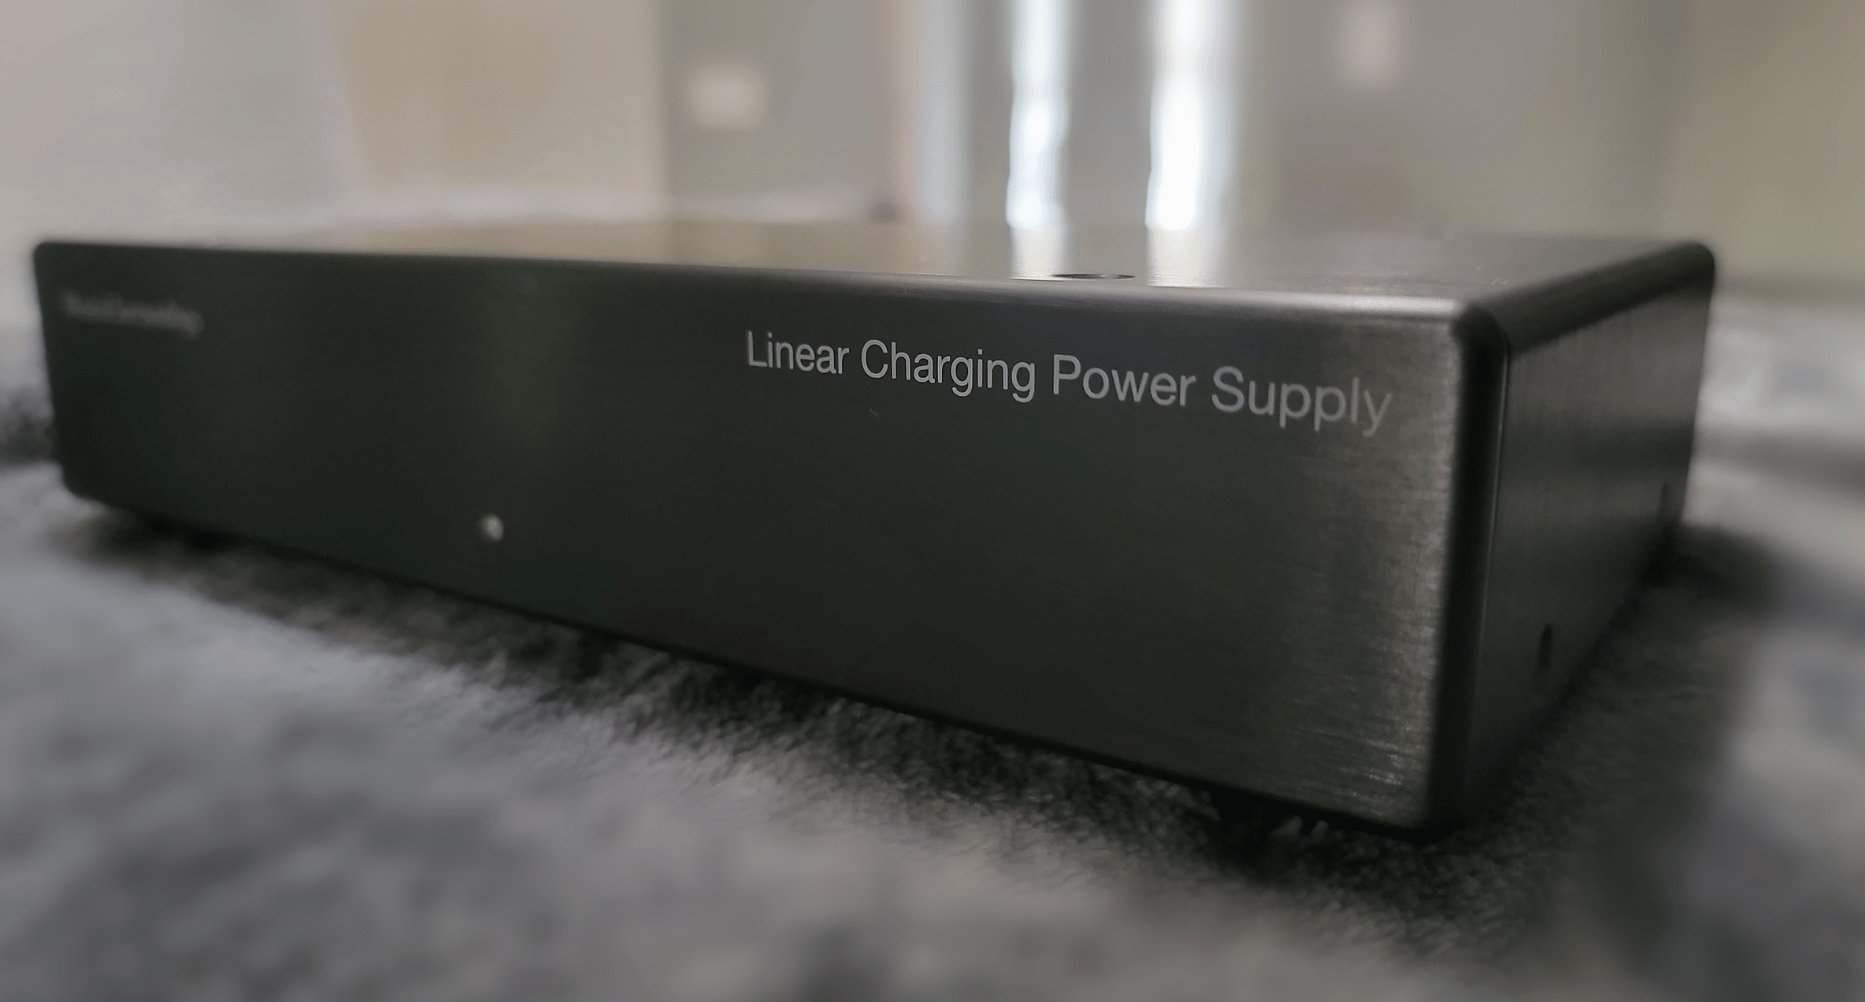 Linear Power Supply (LPS) by Musical Surroundings